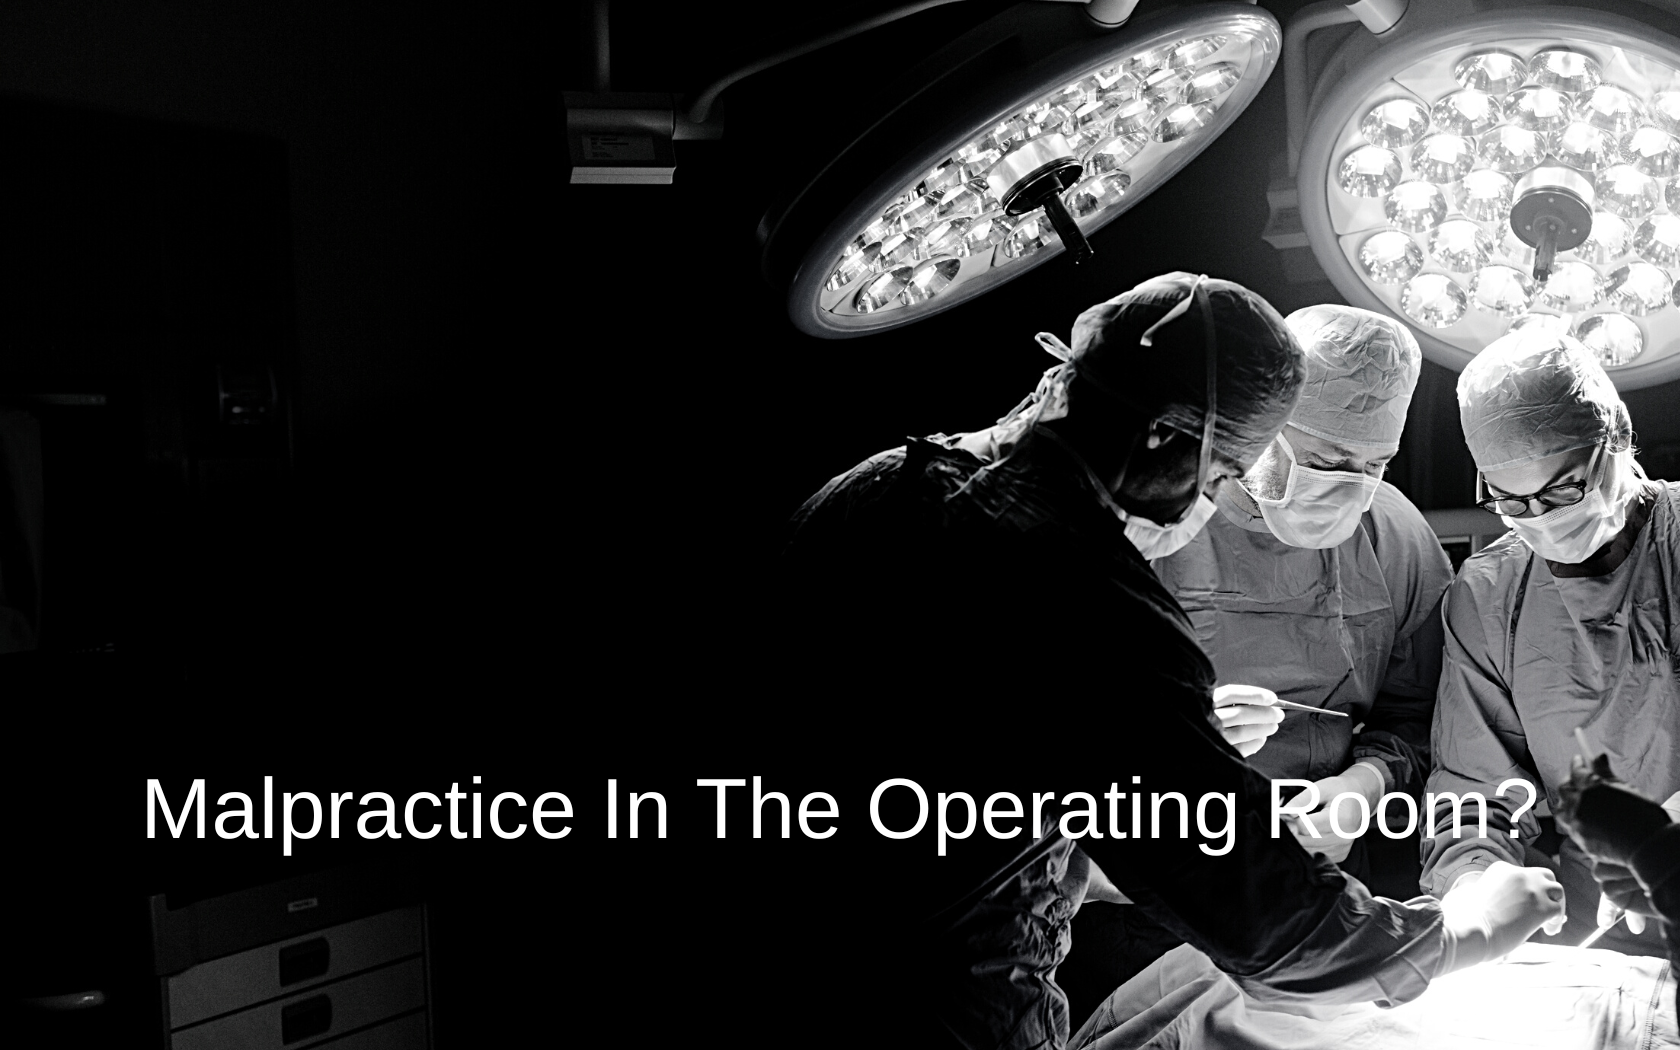 Surgical malpractice in the operating room.